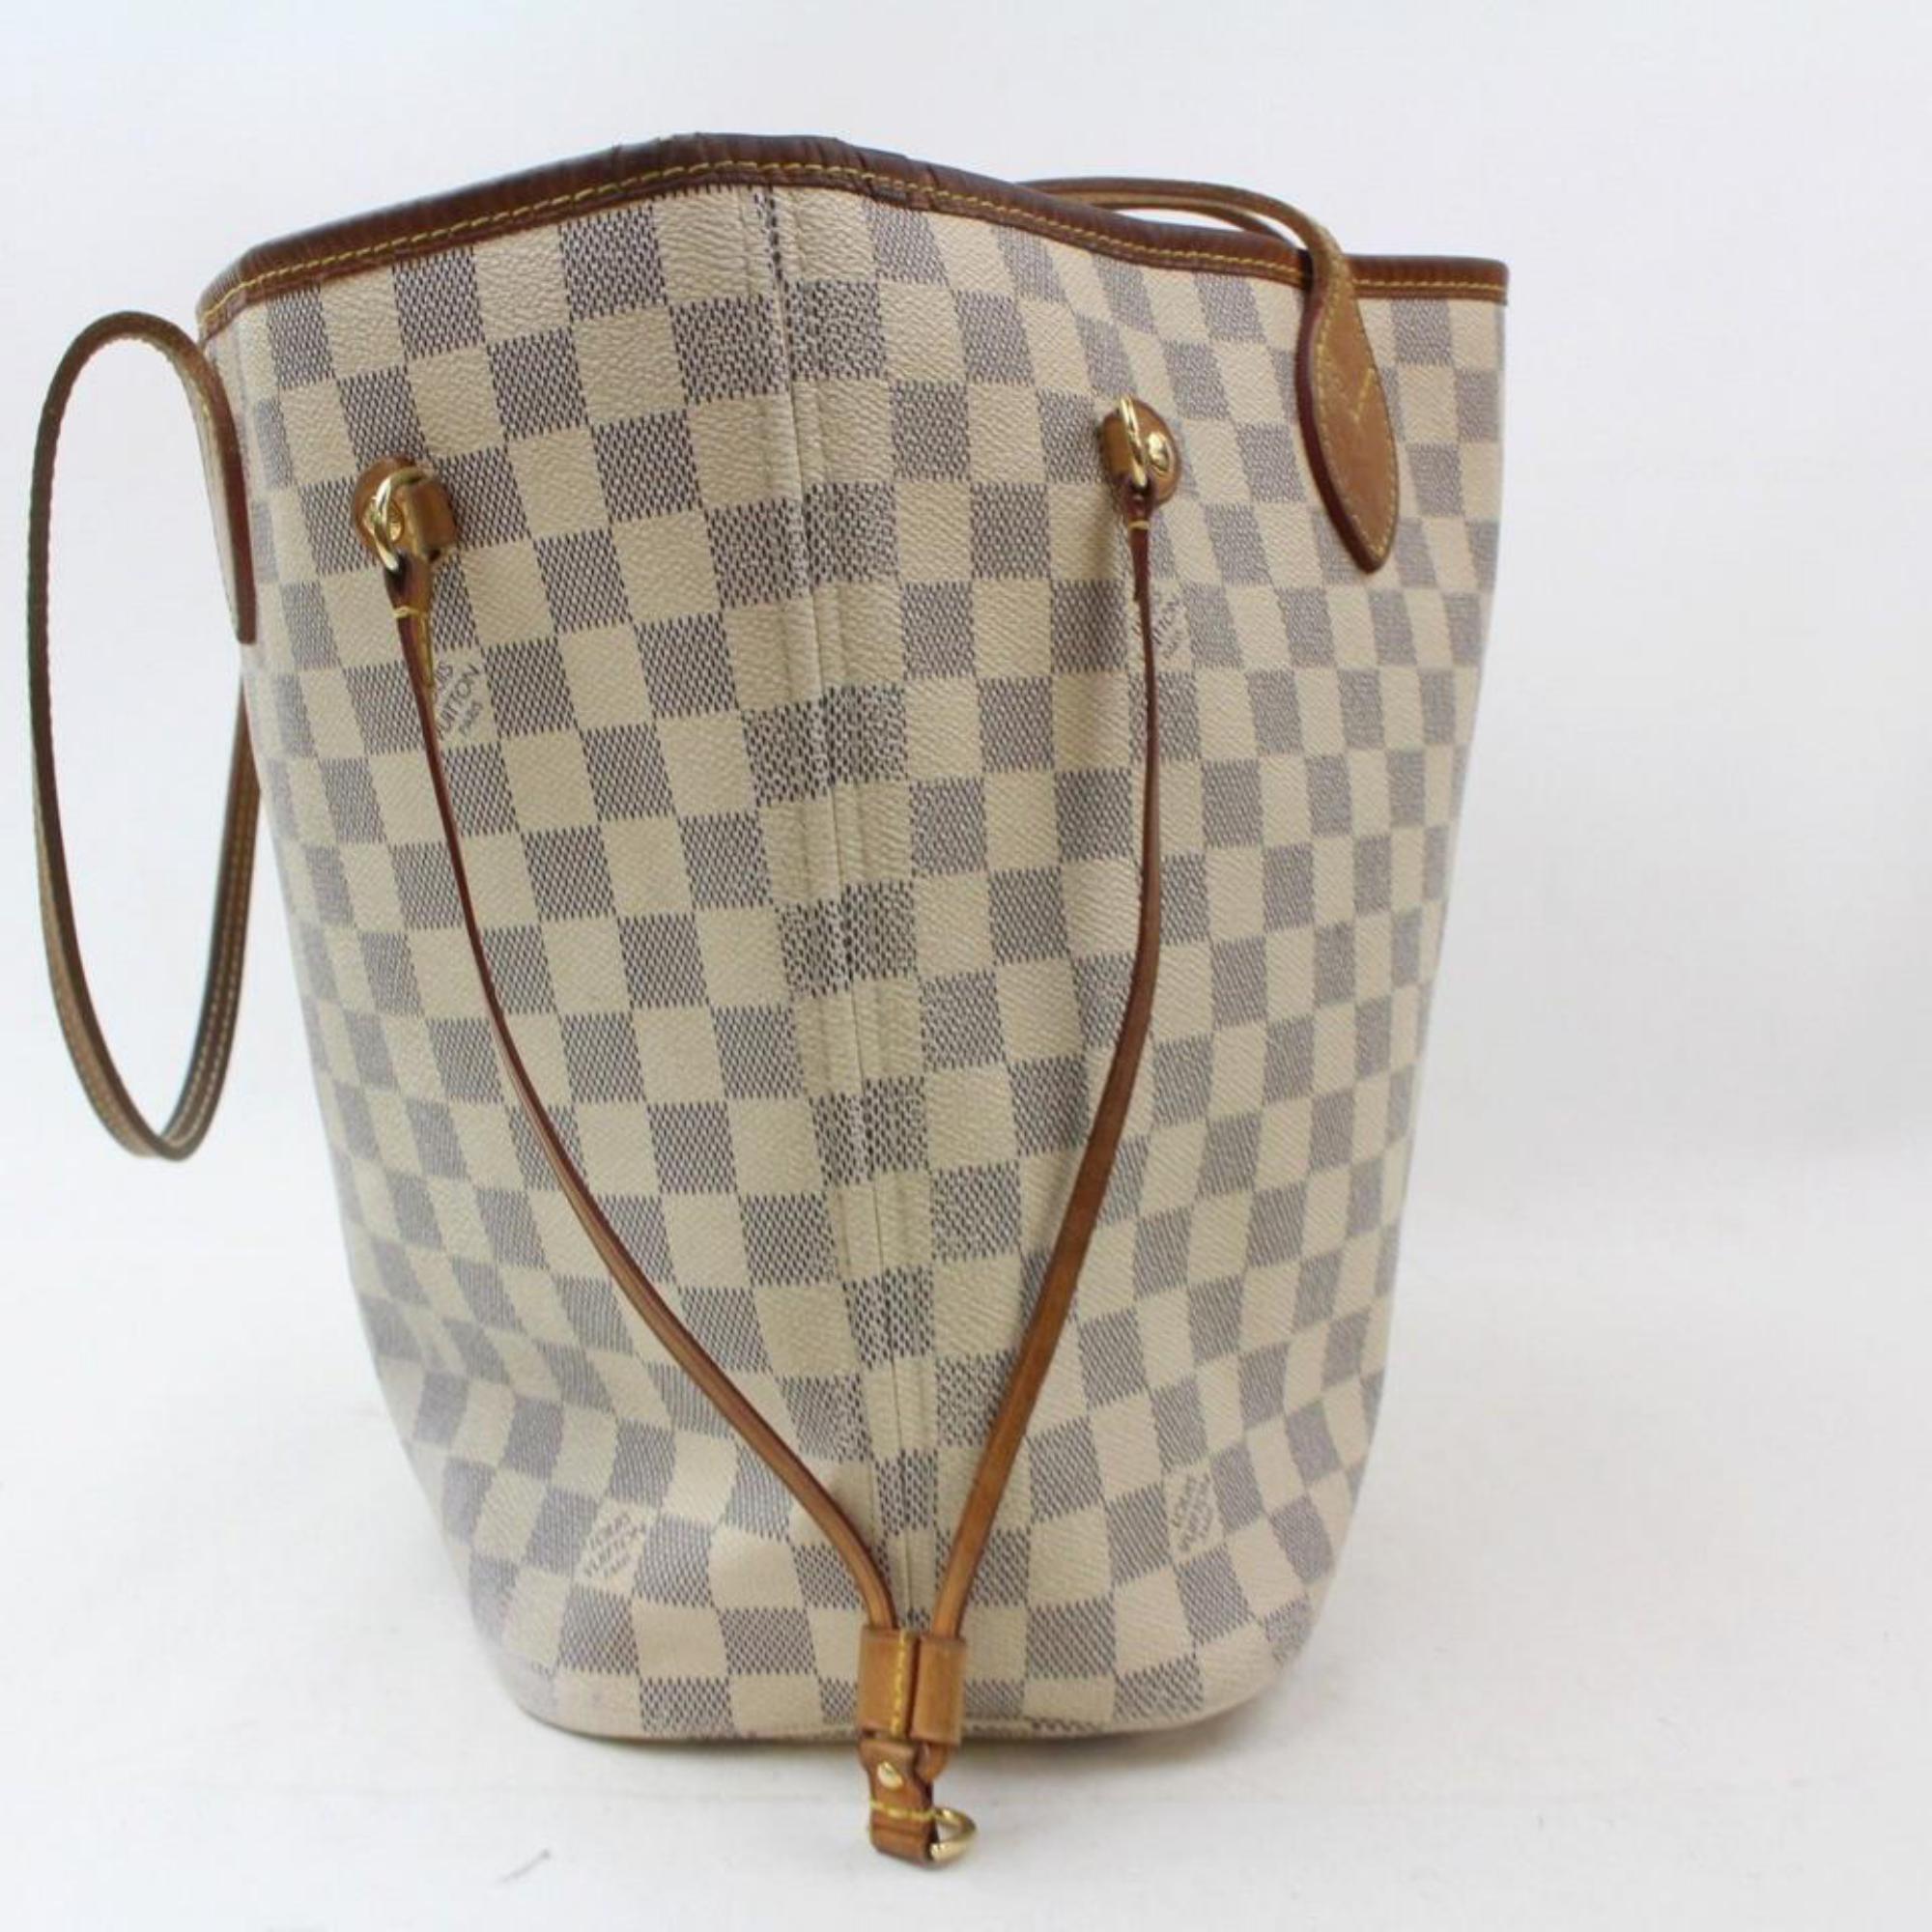 Louis Vuitton Neverfull Damier Azur Mm Everyday Shopper 868990 Canvas Tote For Sale 5